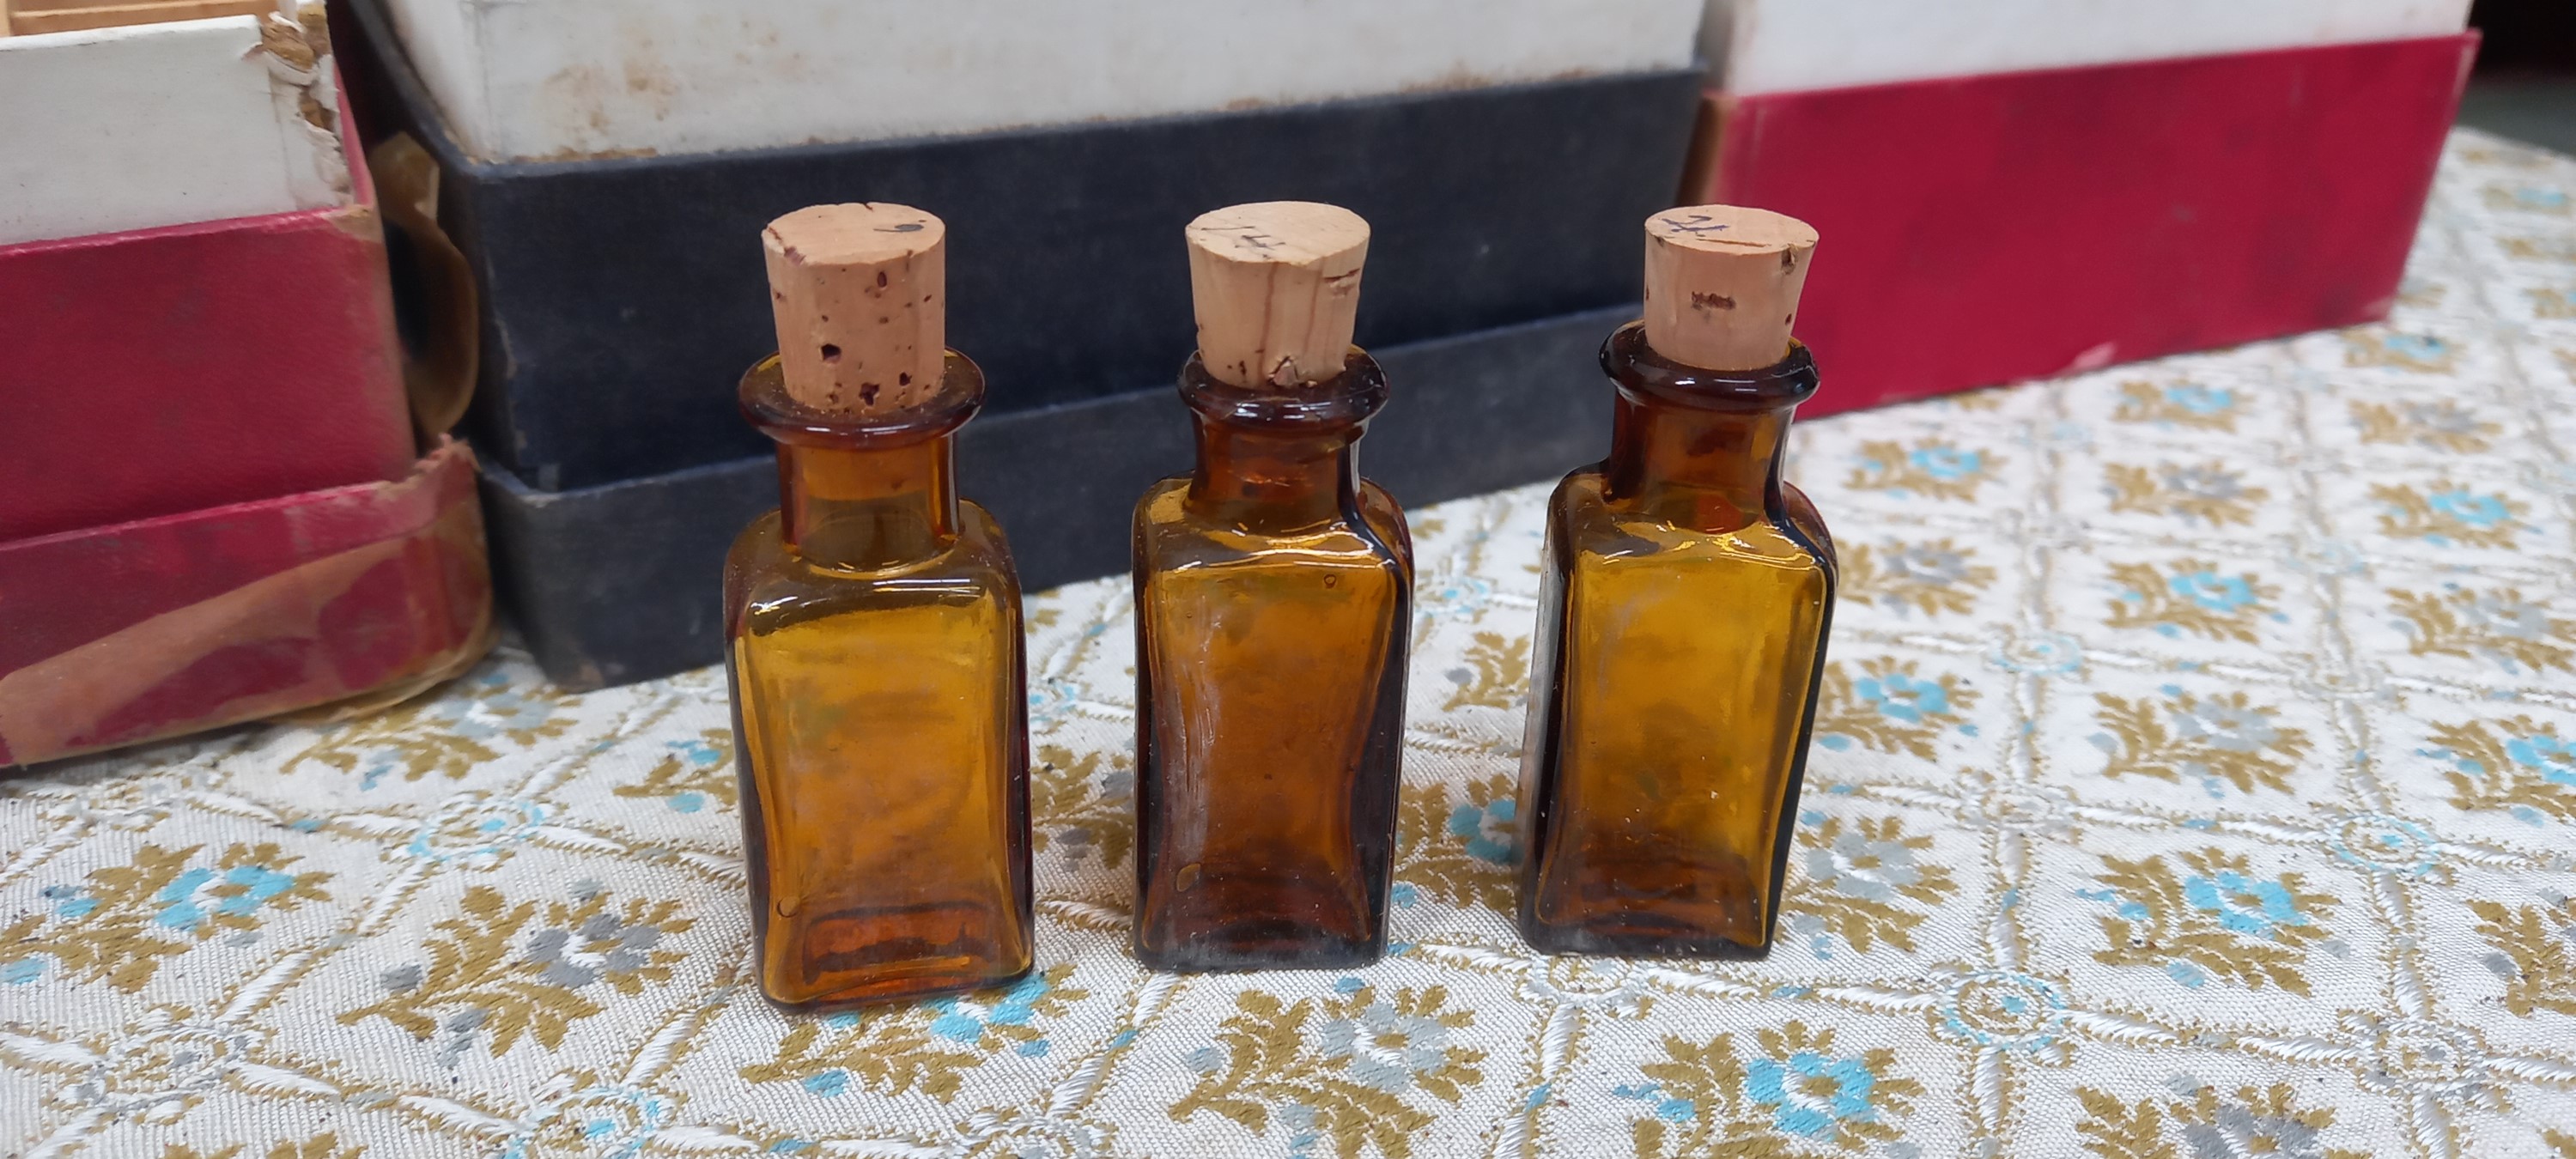 London Homeopathy Laboratories Ltd bottles and boxes. Each bottle stands at 7cm tall. - Image 2 of 2